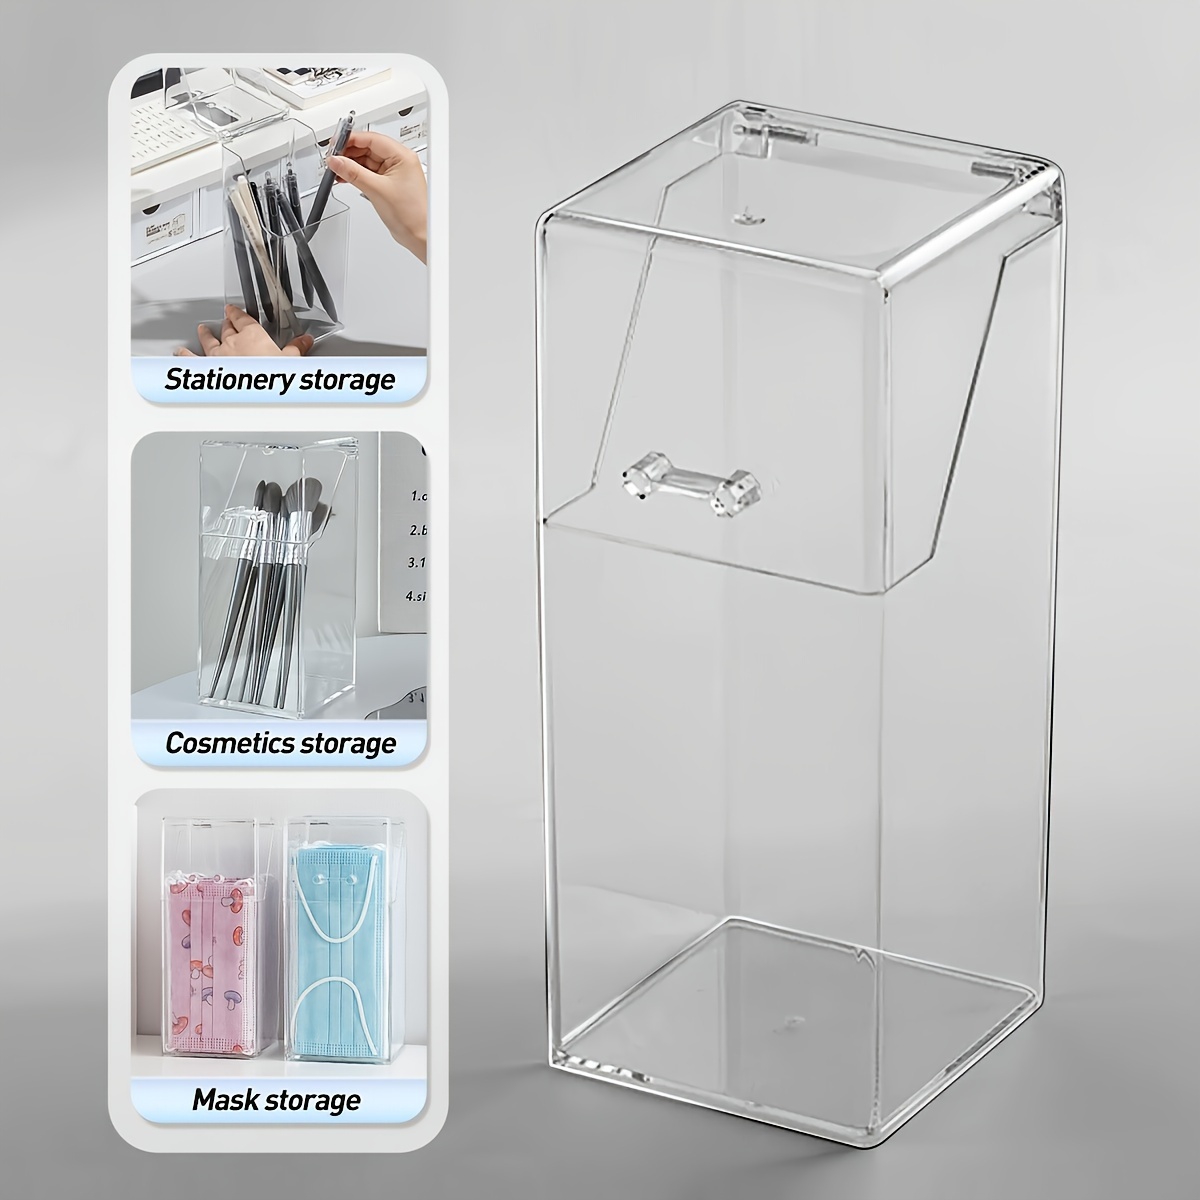 

1pc Clear Acrylic Desk Organizer With Lid, Plastic Storage Bin, Dust-proof Holder For Makeup Brushes And Pens, Cosmetic Organizing Container